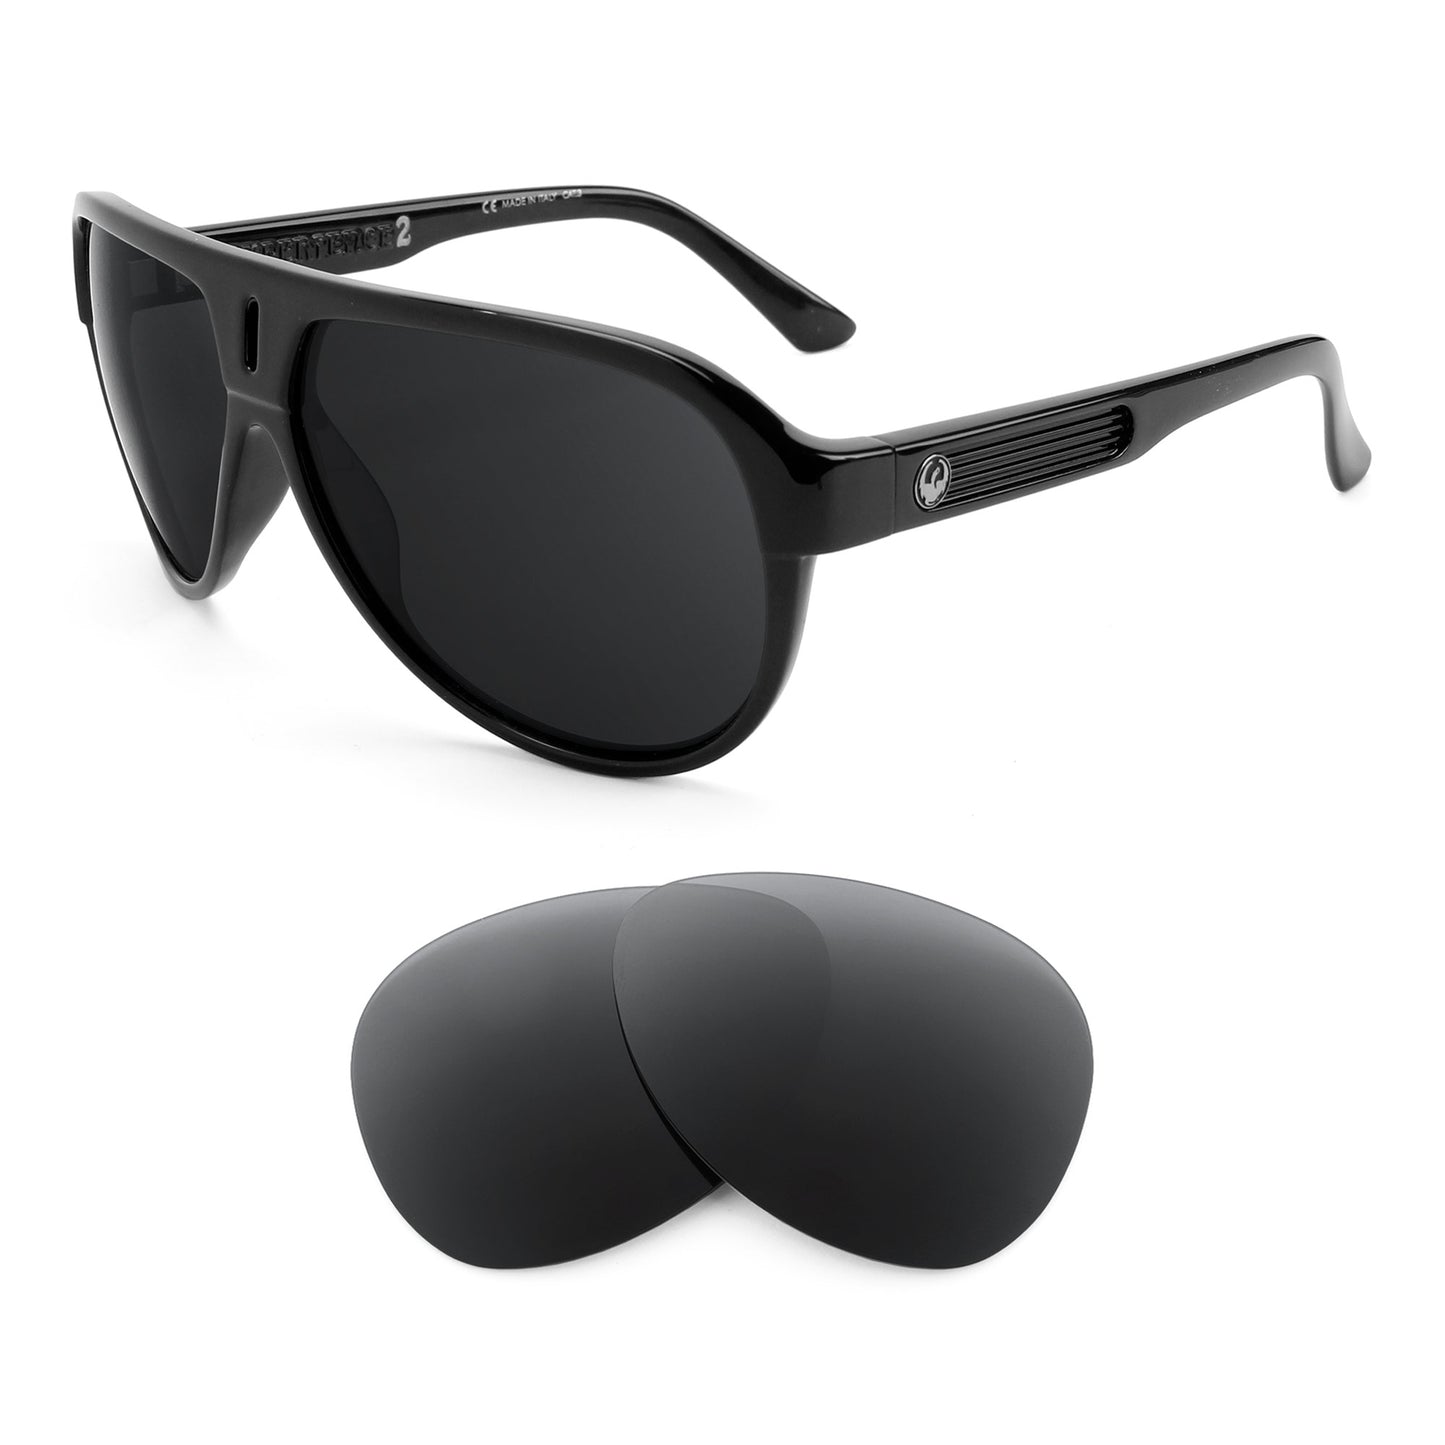 Dragon Experience II sunglasses with replacement lenses